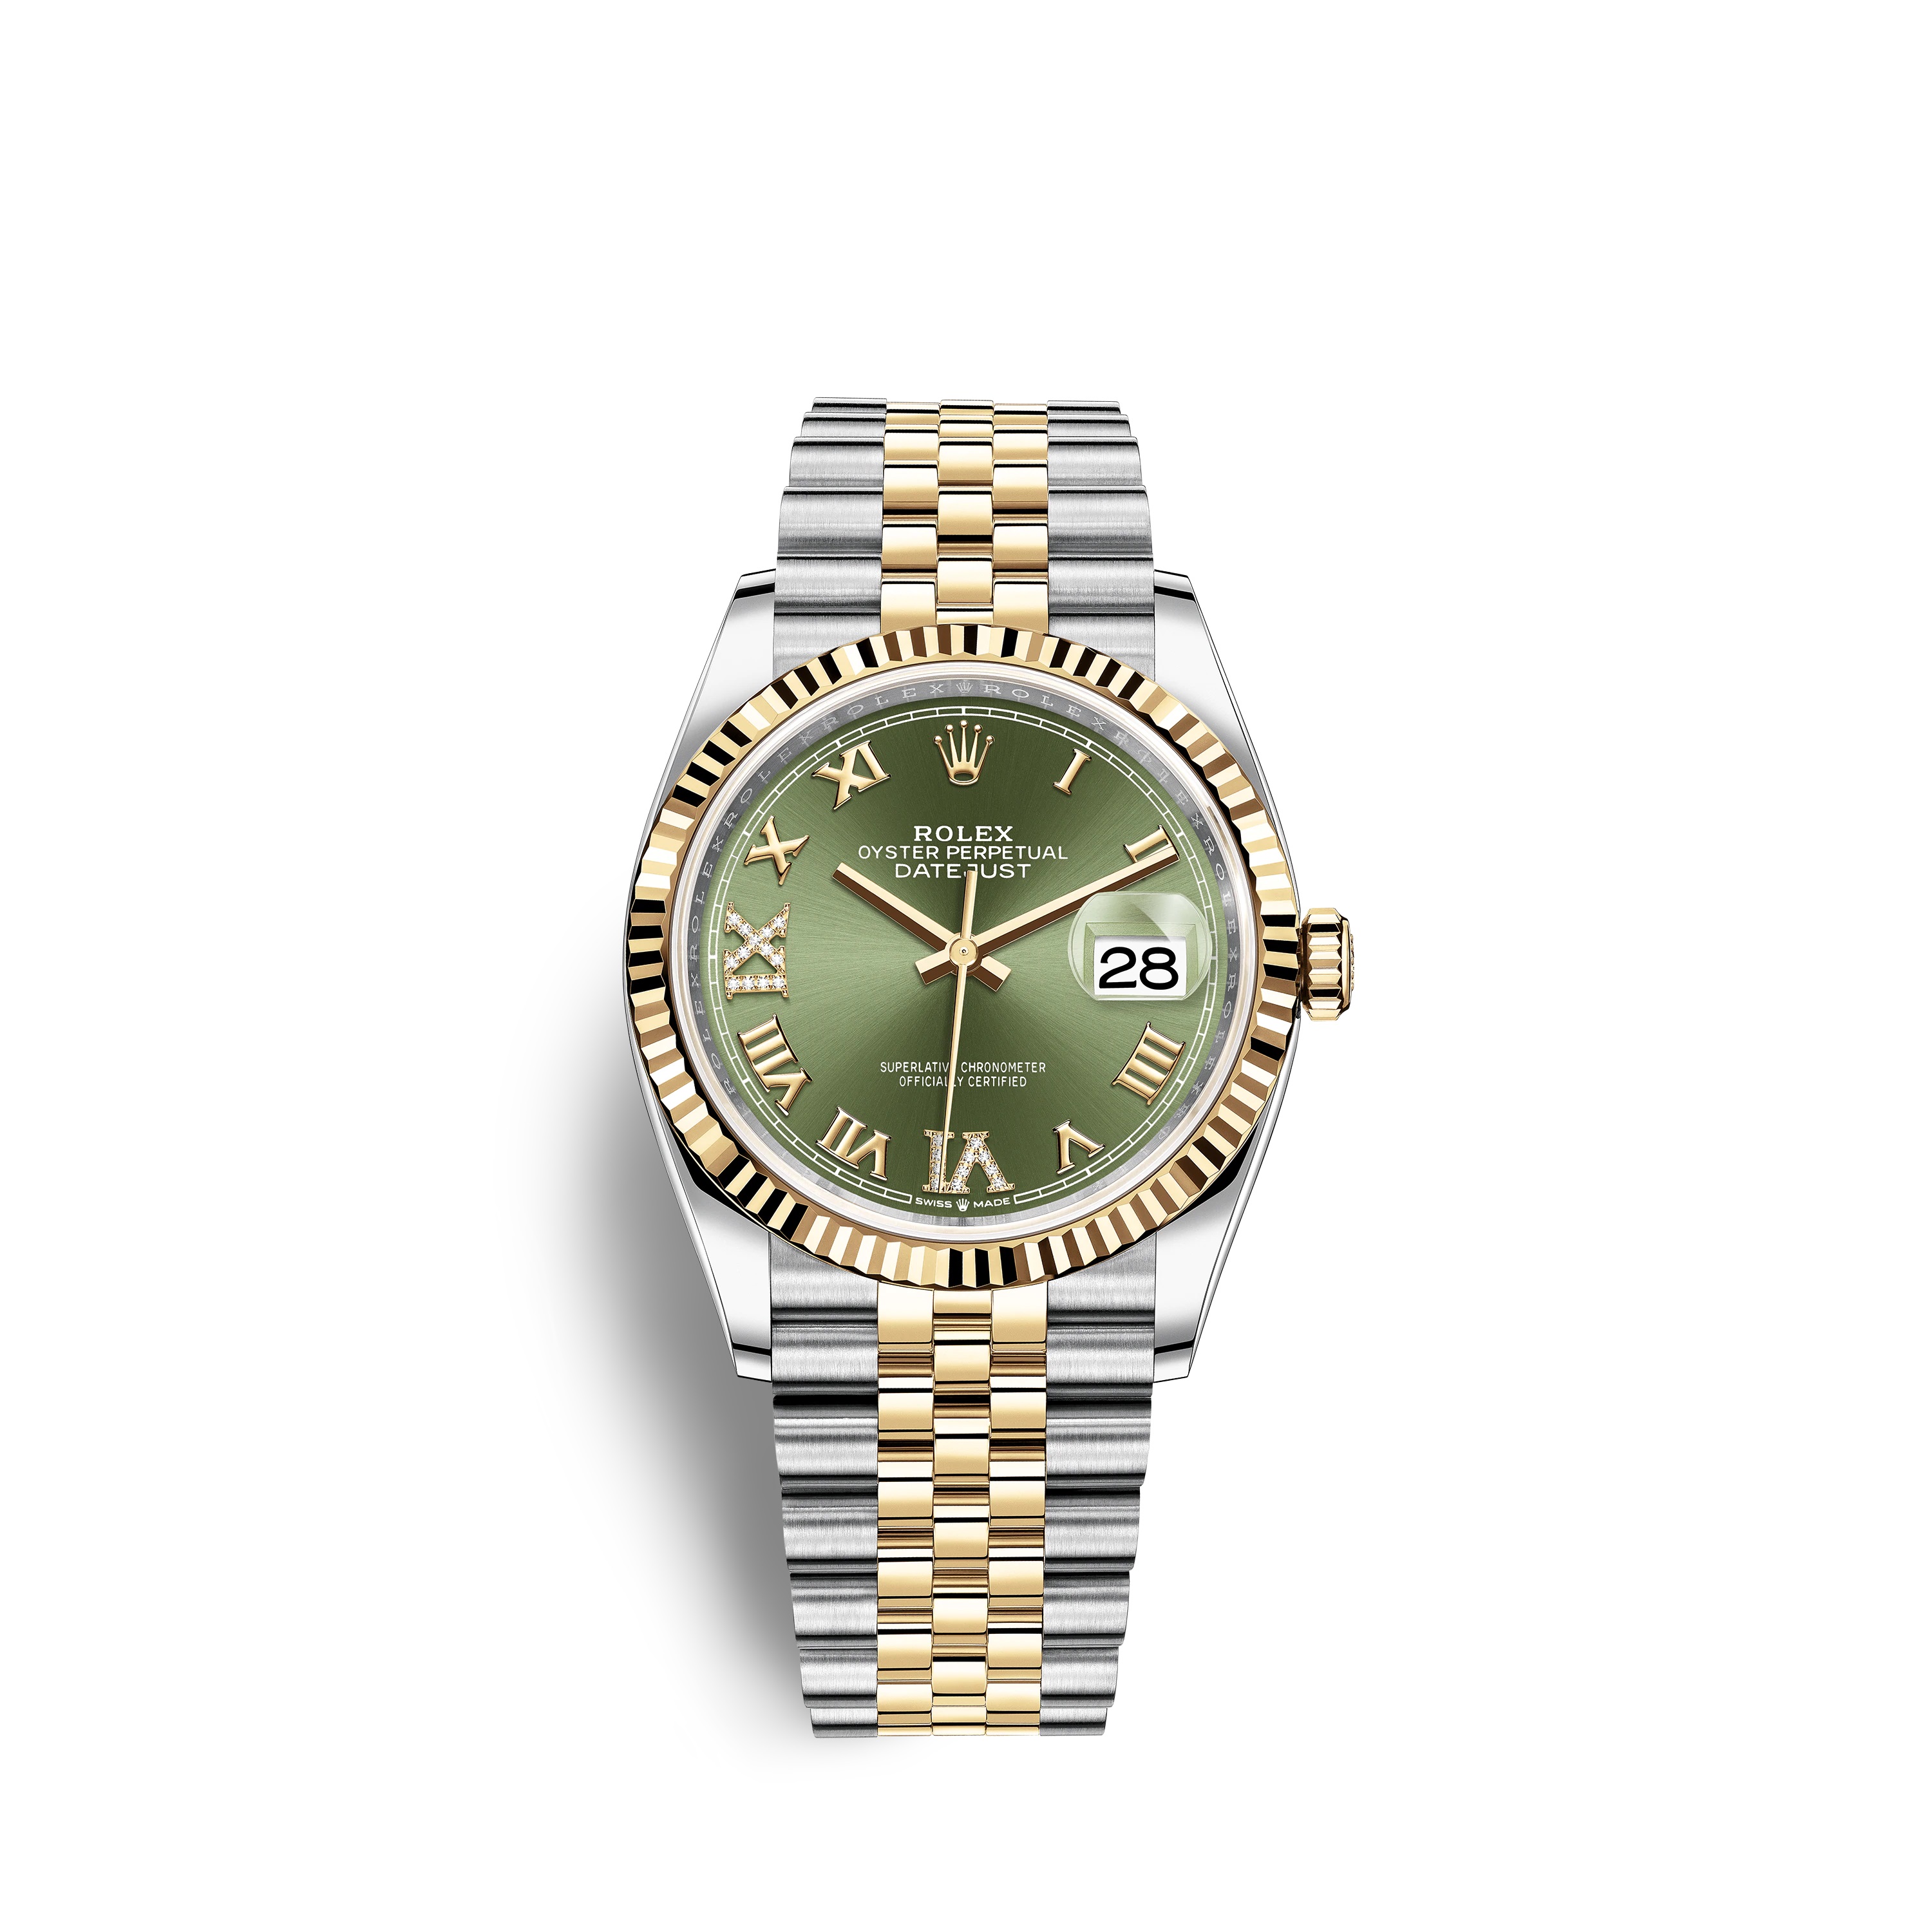 Datejust 36 126233 Gold & Stainless Steel Watch (Olive Green Set with Diamonds)